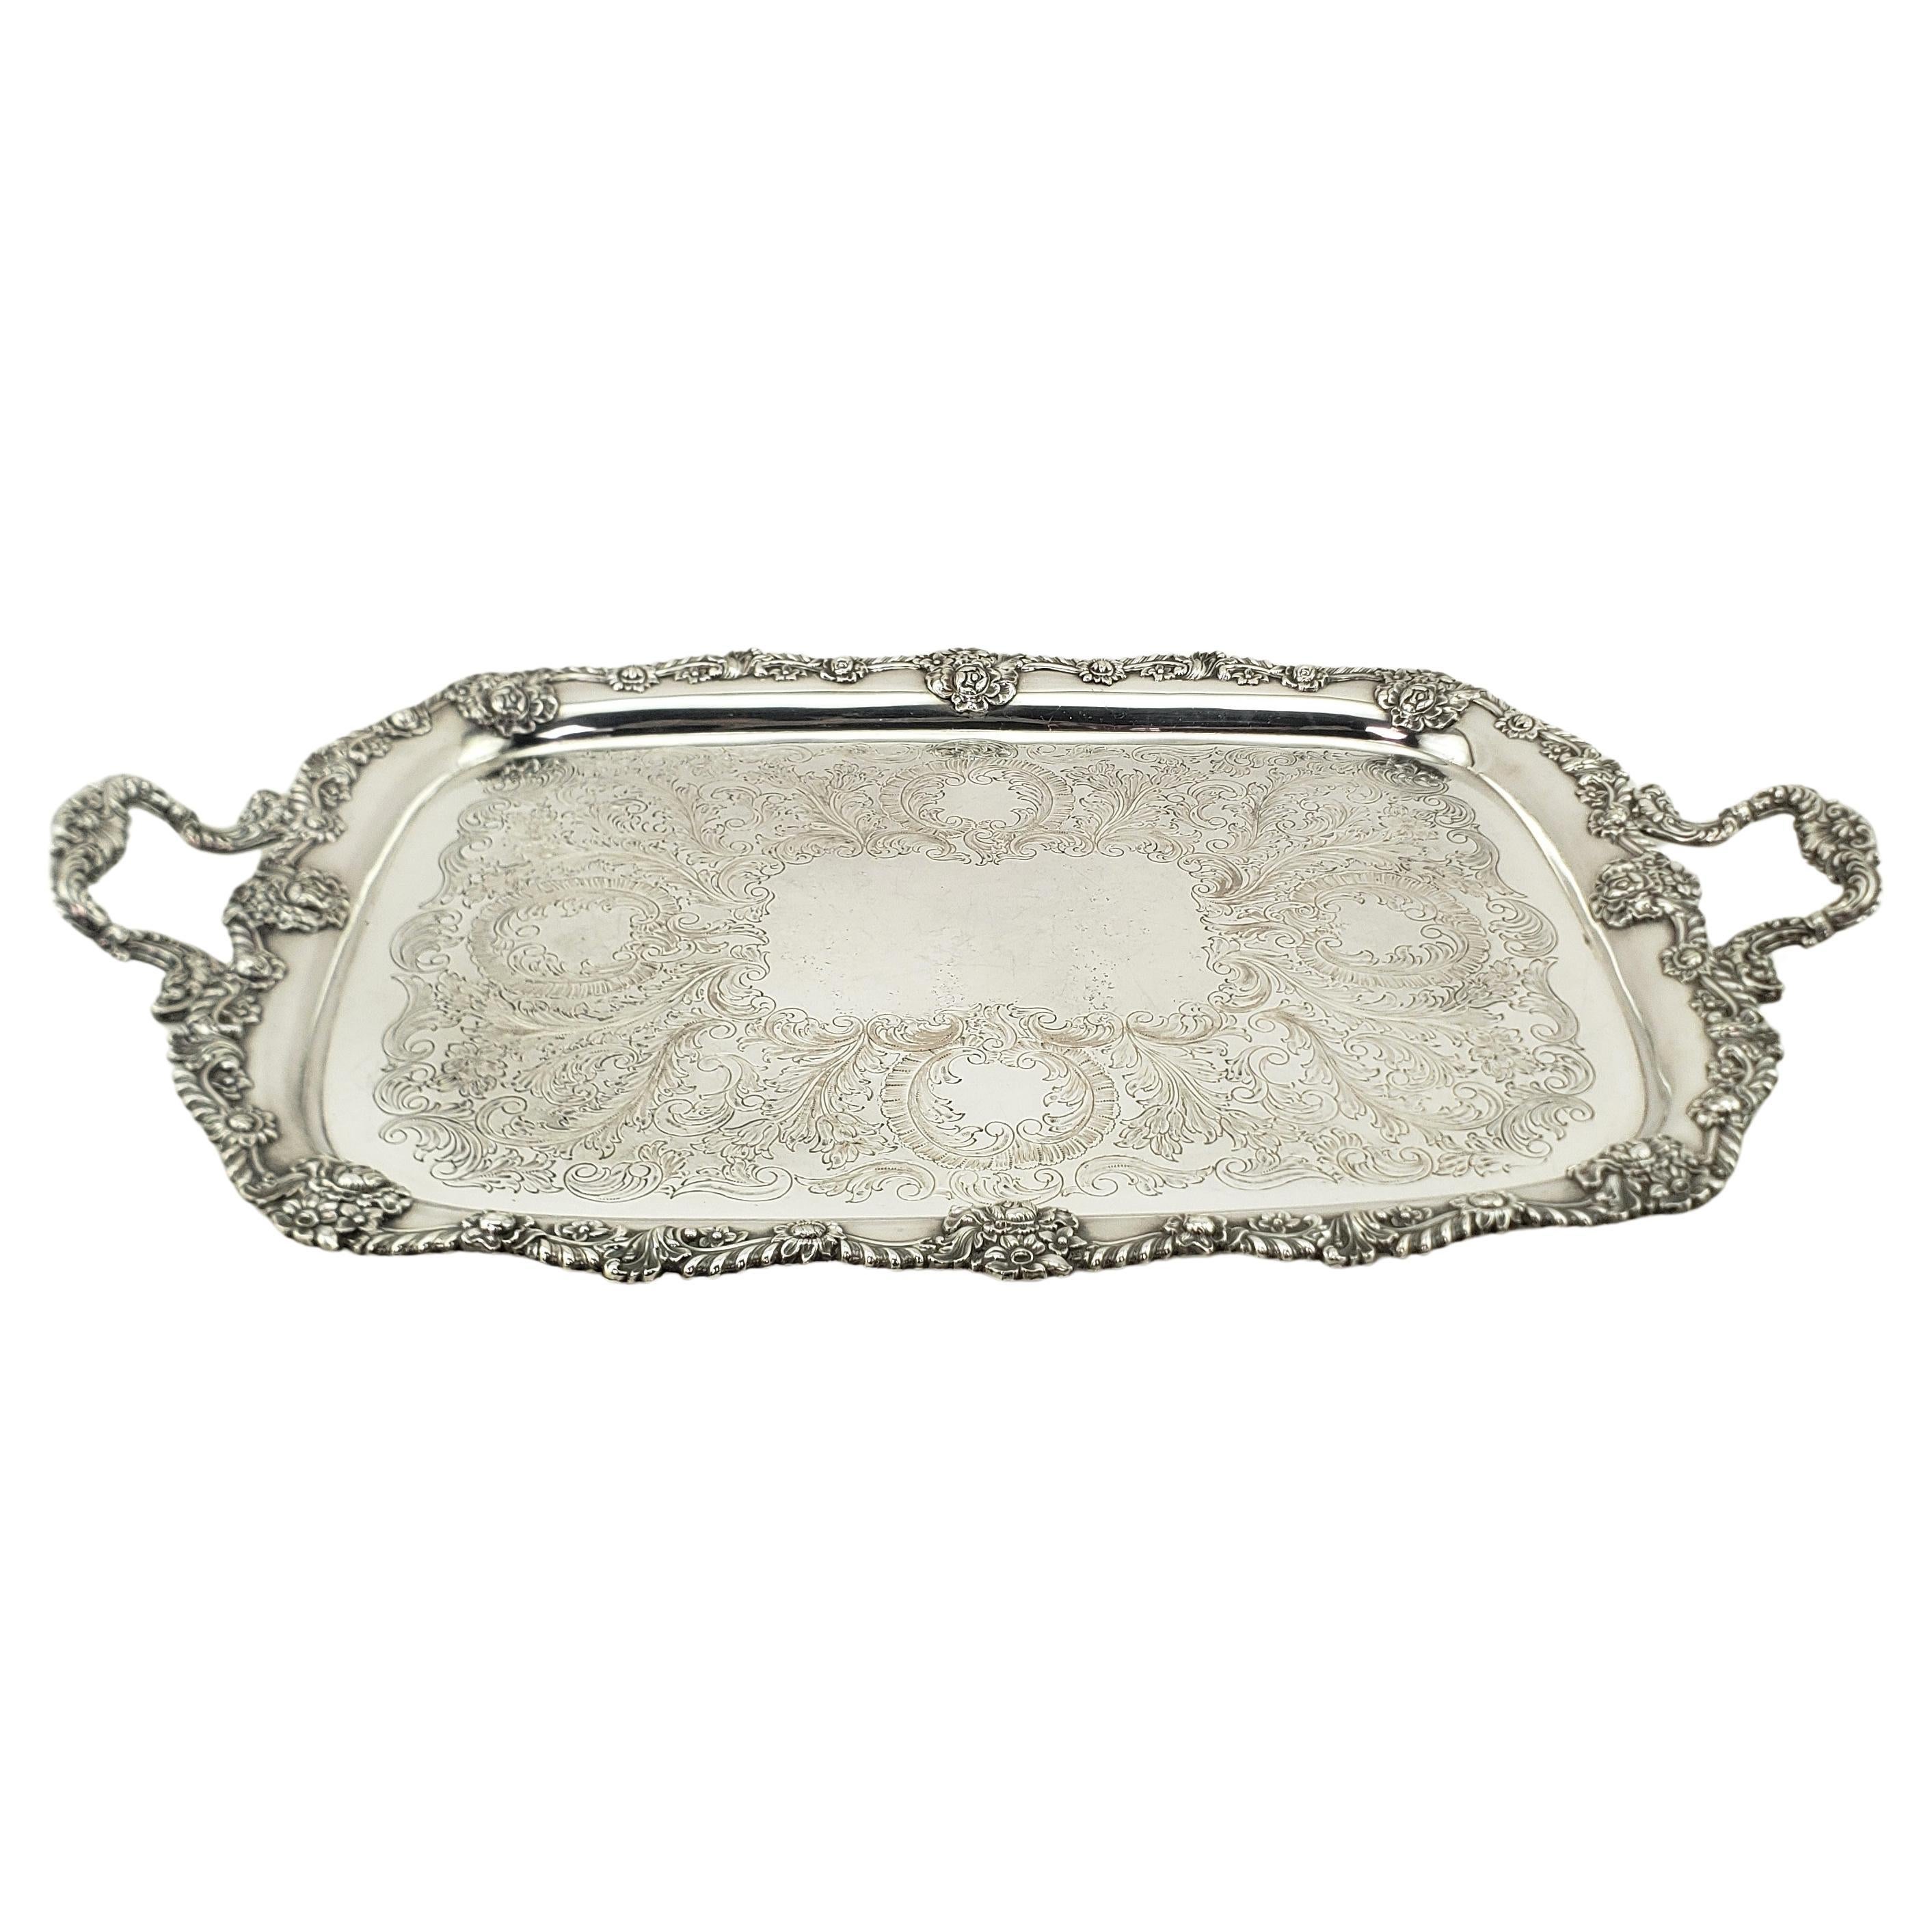 Large Antique English Silver Plated Serving Tray with Ornate Floral Decoration For Sale